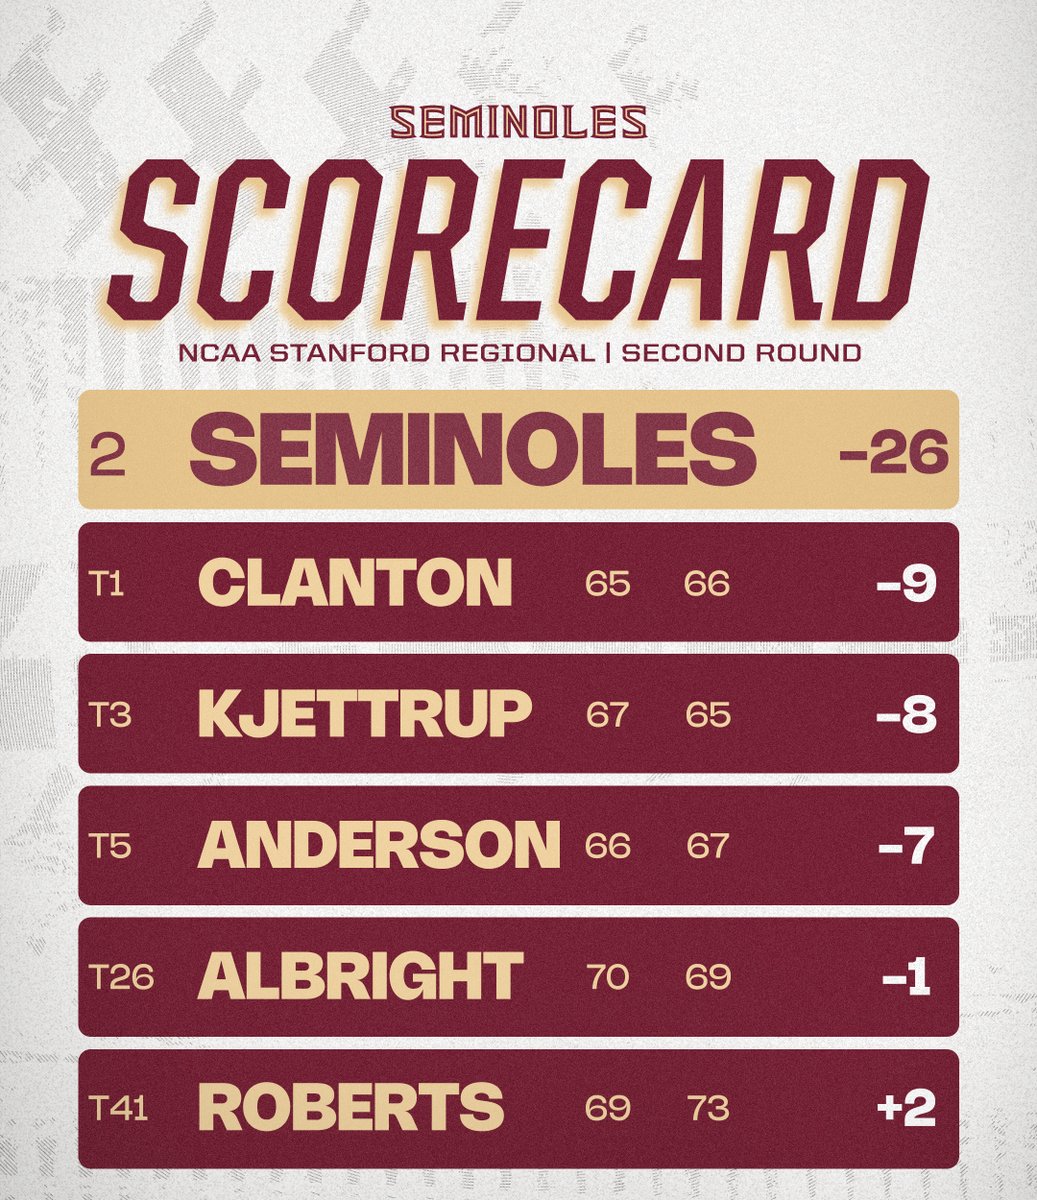 𝗔𝗡𝗢𝗧𝗛𝗘𝗥 𝗠𝗔𝗦𝗧𝗘𝗥𝗣𝗜𝗘𝗖𝗘 ⛳

The Seminoles shoot 13-under for a second consecutive round at the NCAA Stanford Regional!

The Noles head into the clubhouse one stroke off the lead at 26-under!

#OneTribe | #GoNoles